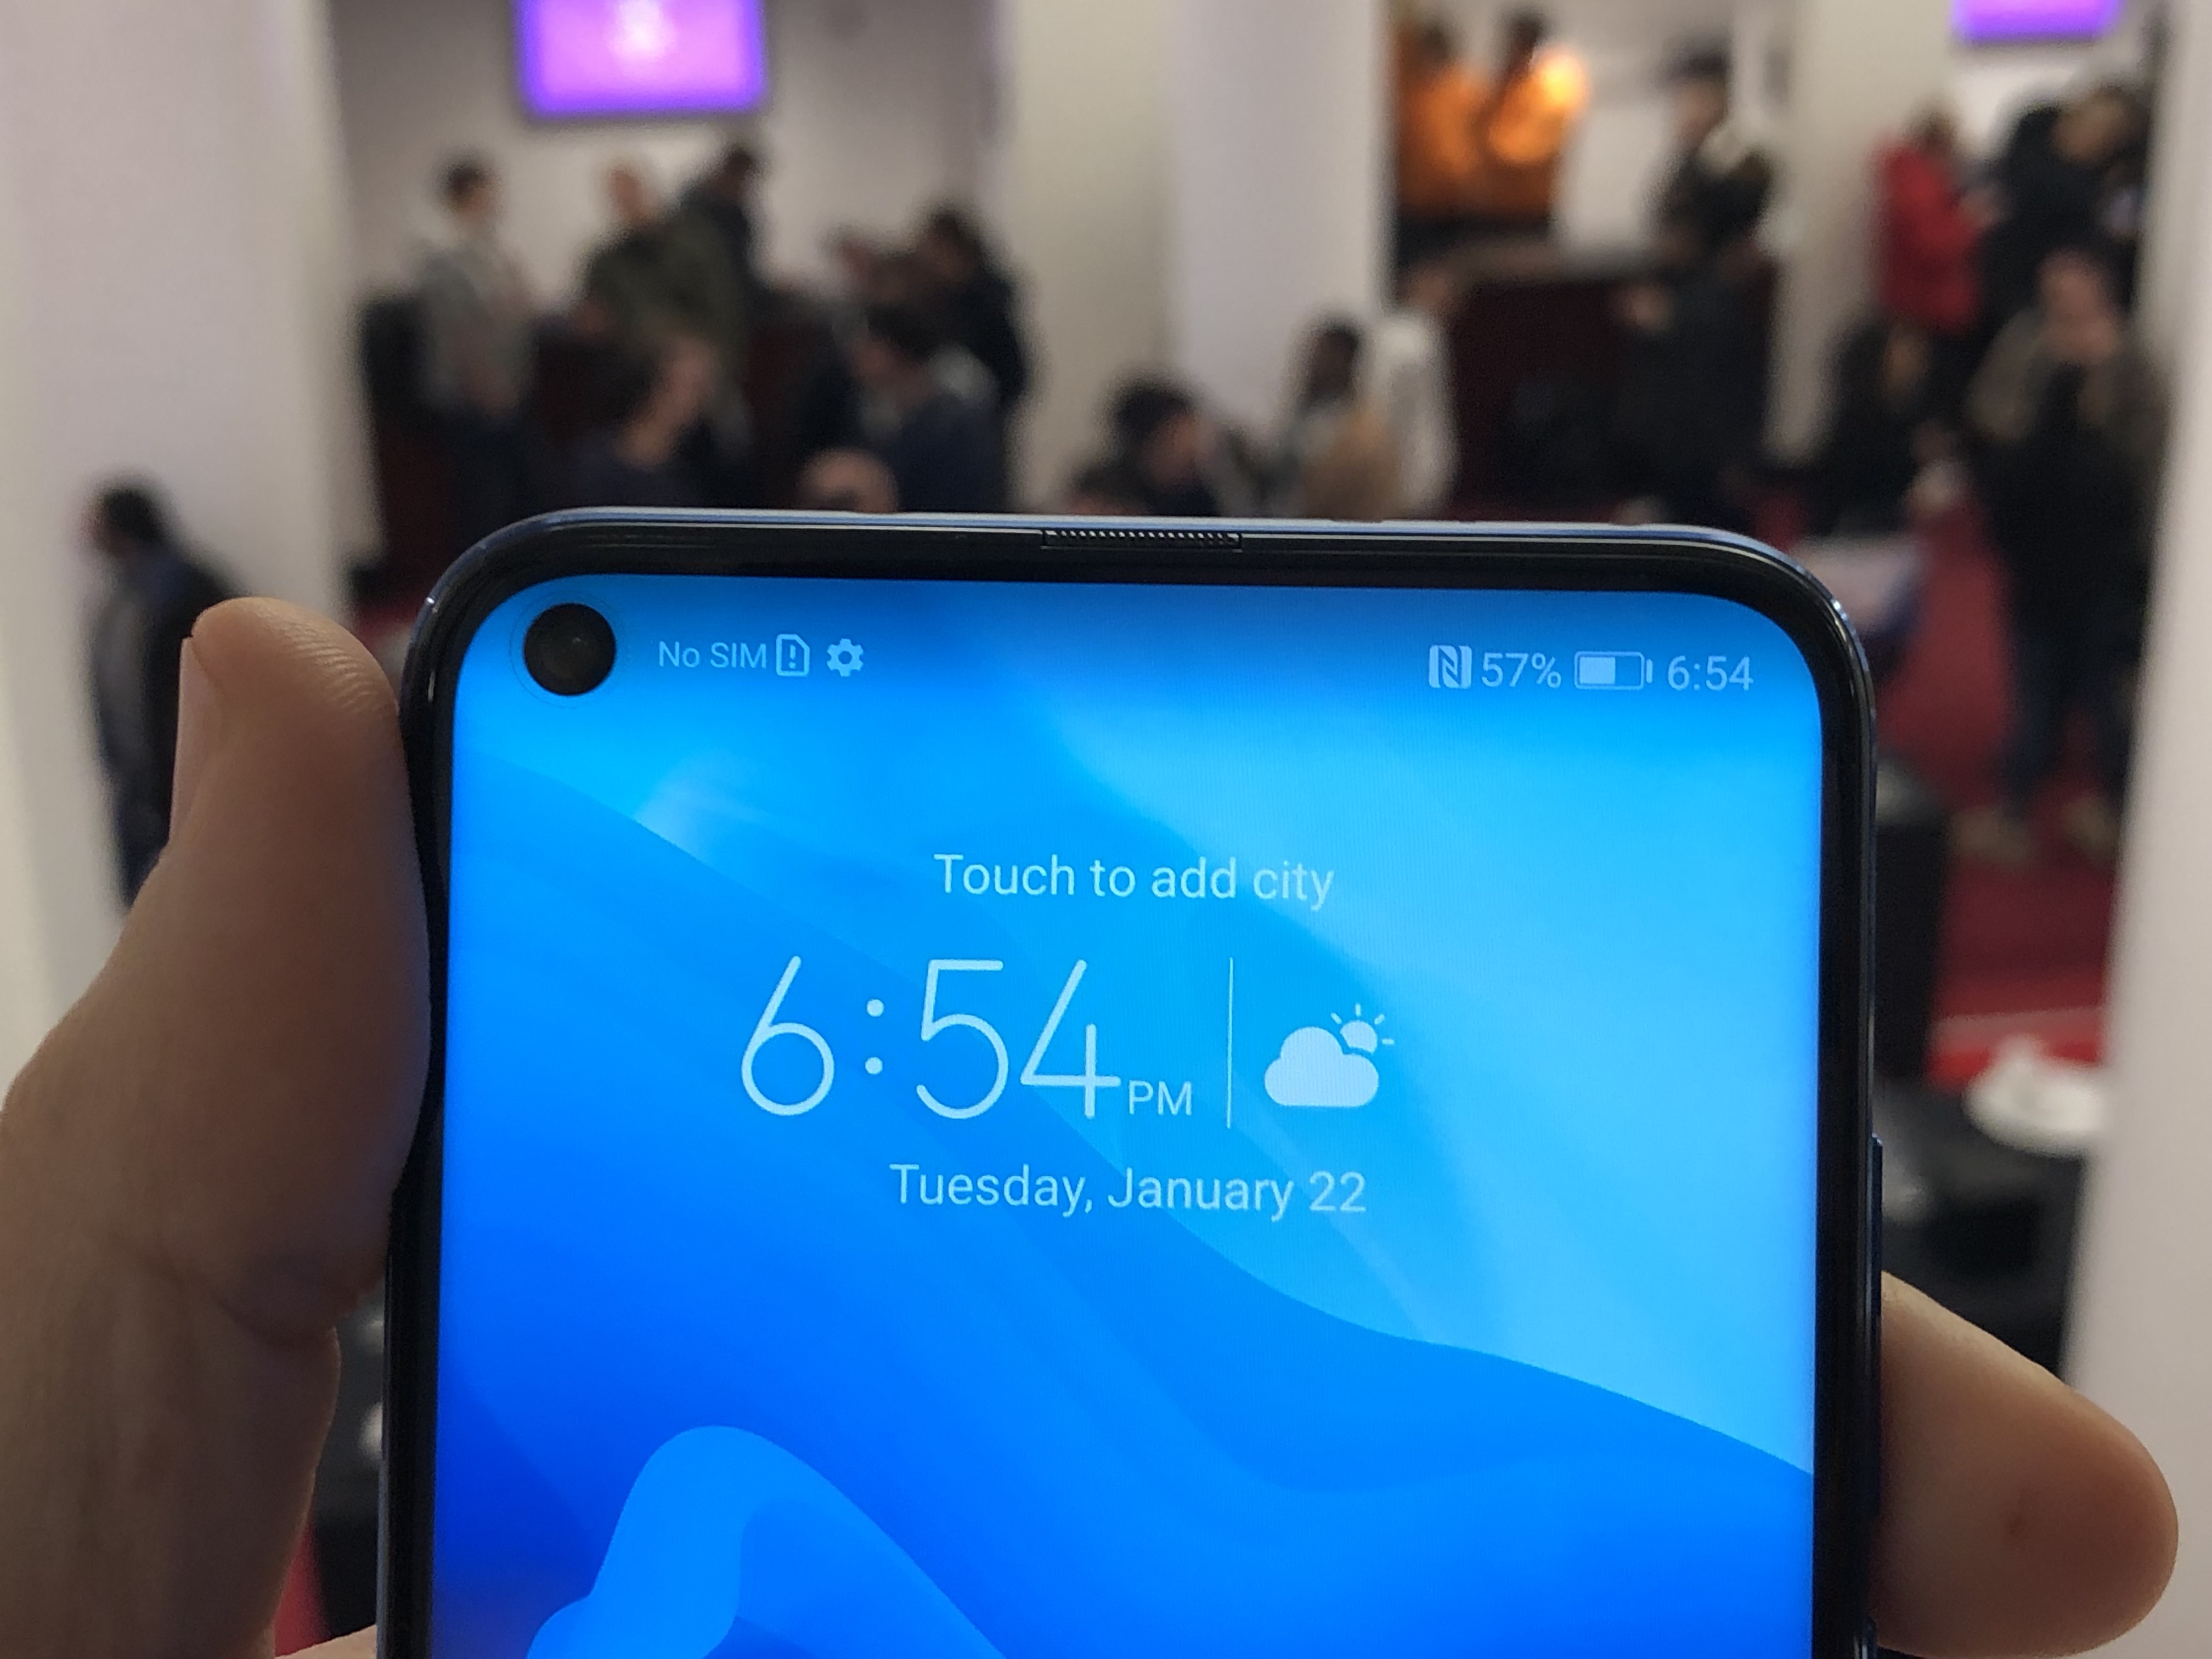 Huawei Honor S Smartphone With A Hole Punch Display Is Real Internet Technology News - roblox scripting and animating a punch ability filtering enabled compatible